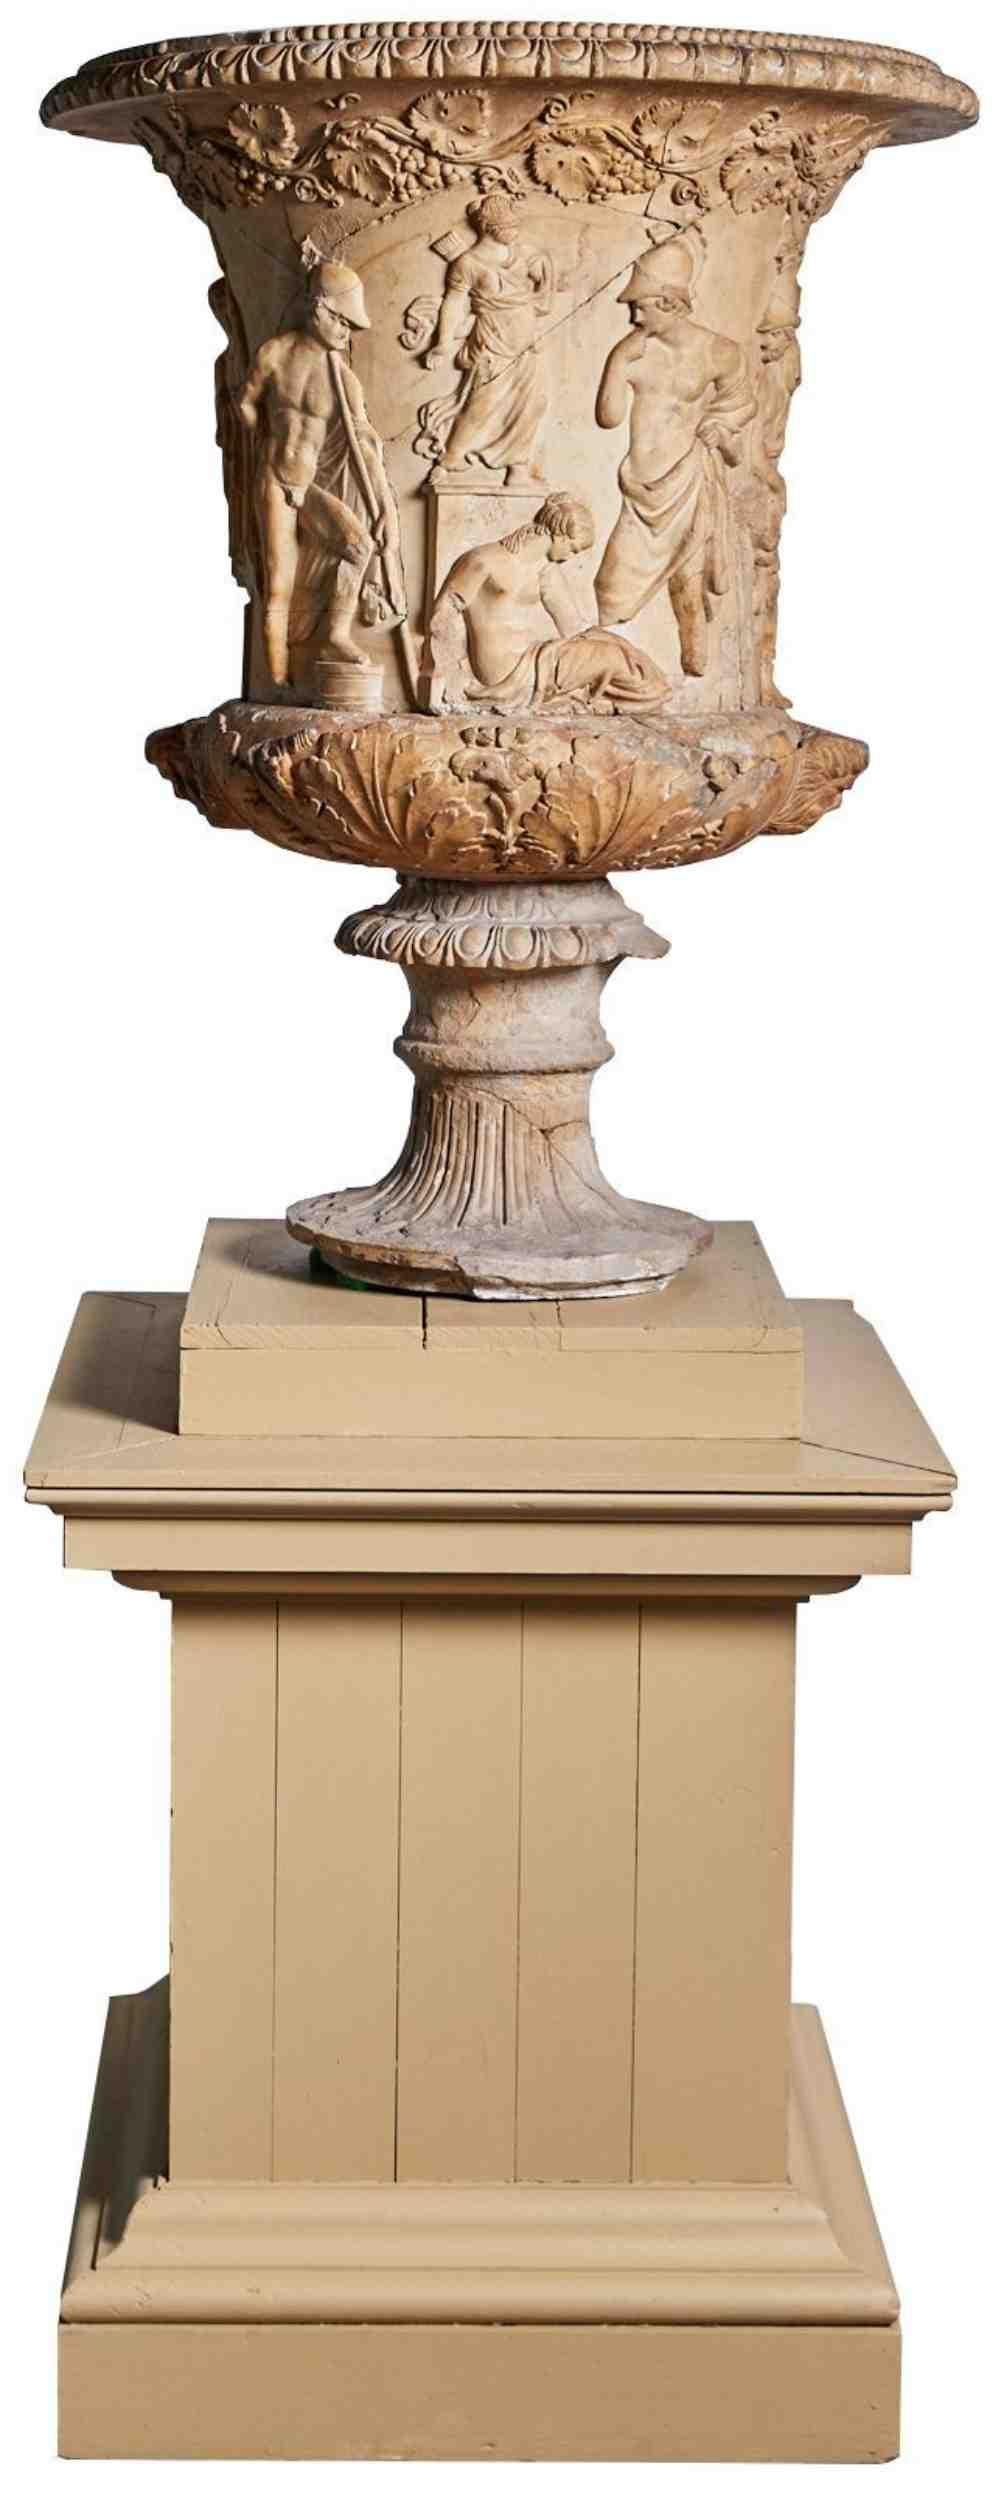 Coade Stone Medici urn. A large Coade stone urn after the The Medici Vase. The Urn comes with a custom timber pedestal.
Attached is an image taken from Mrs Coades Stone by Allison Kelly. The photograph shows a similar Coade design to the Medici